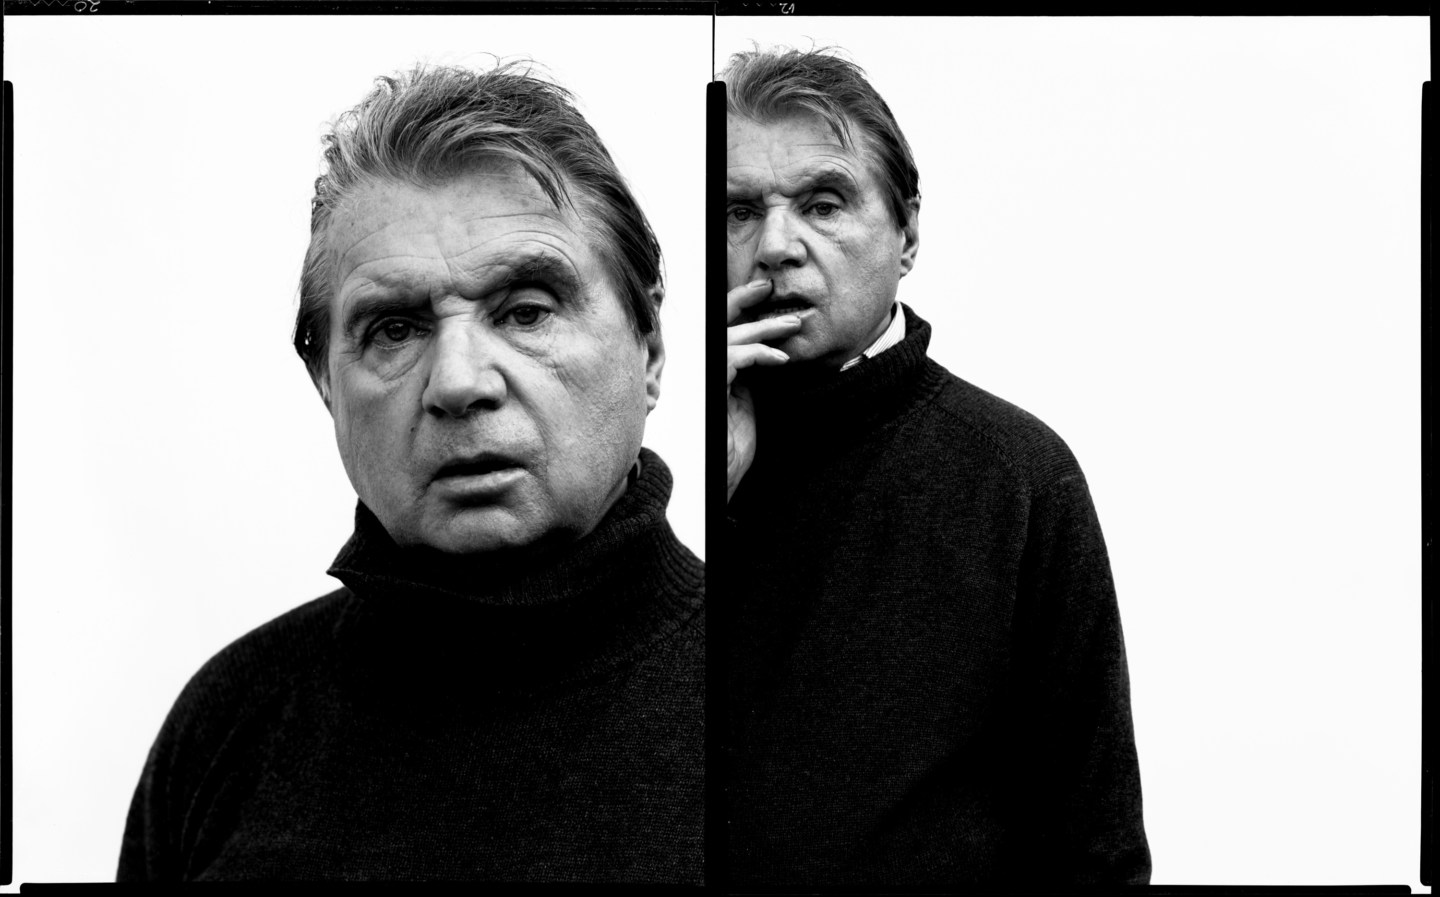 A diptych of black and white photographs of Francis Bacon. In the left, the artist appears close up, and in the right image, the artist has his hand on his face.